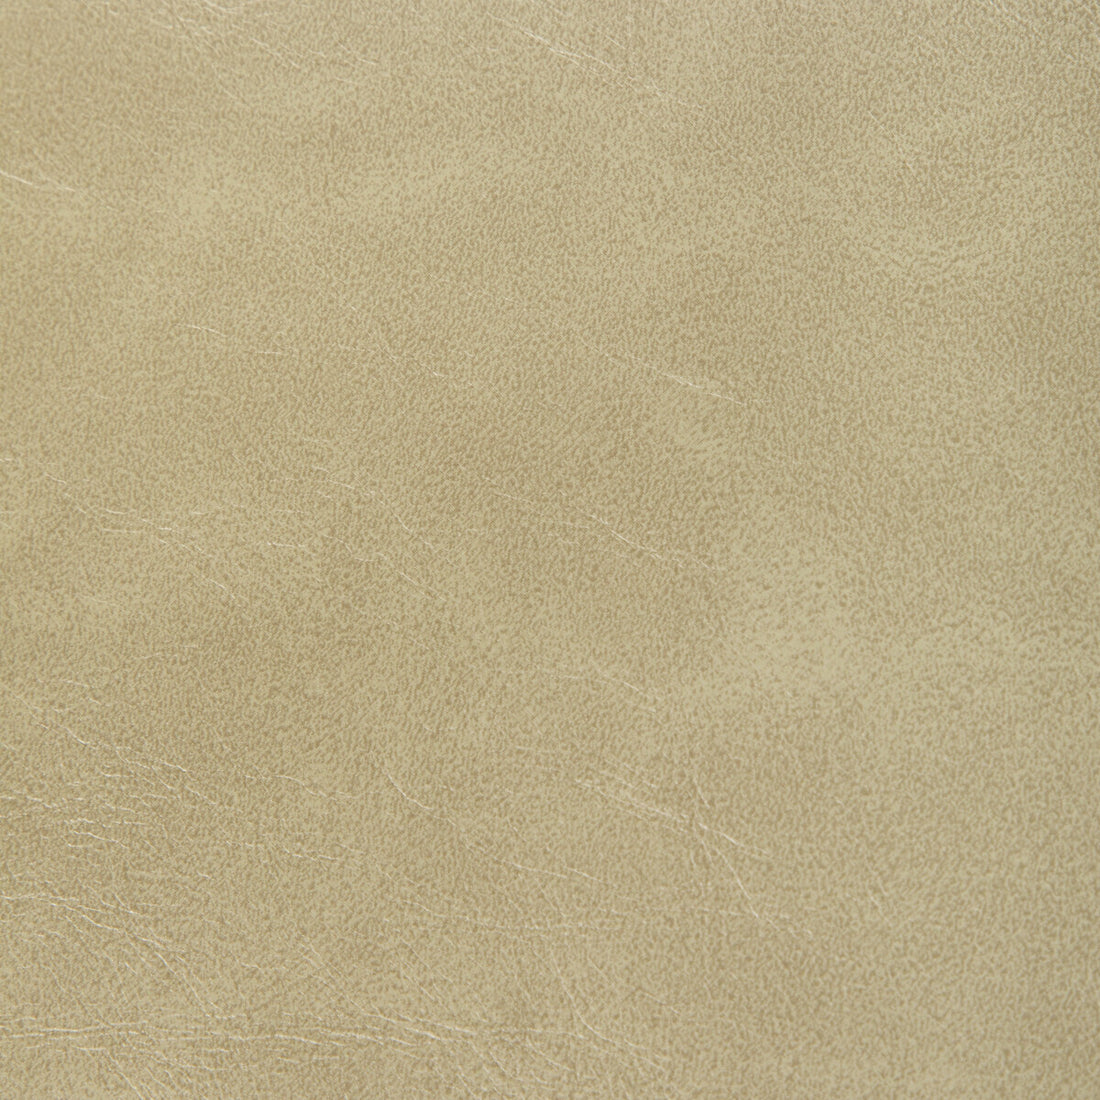 Rambler fabric in prairie color - pattern RAMBLER.16.0 - by Kravet Contract